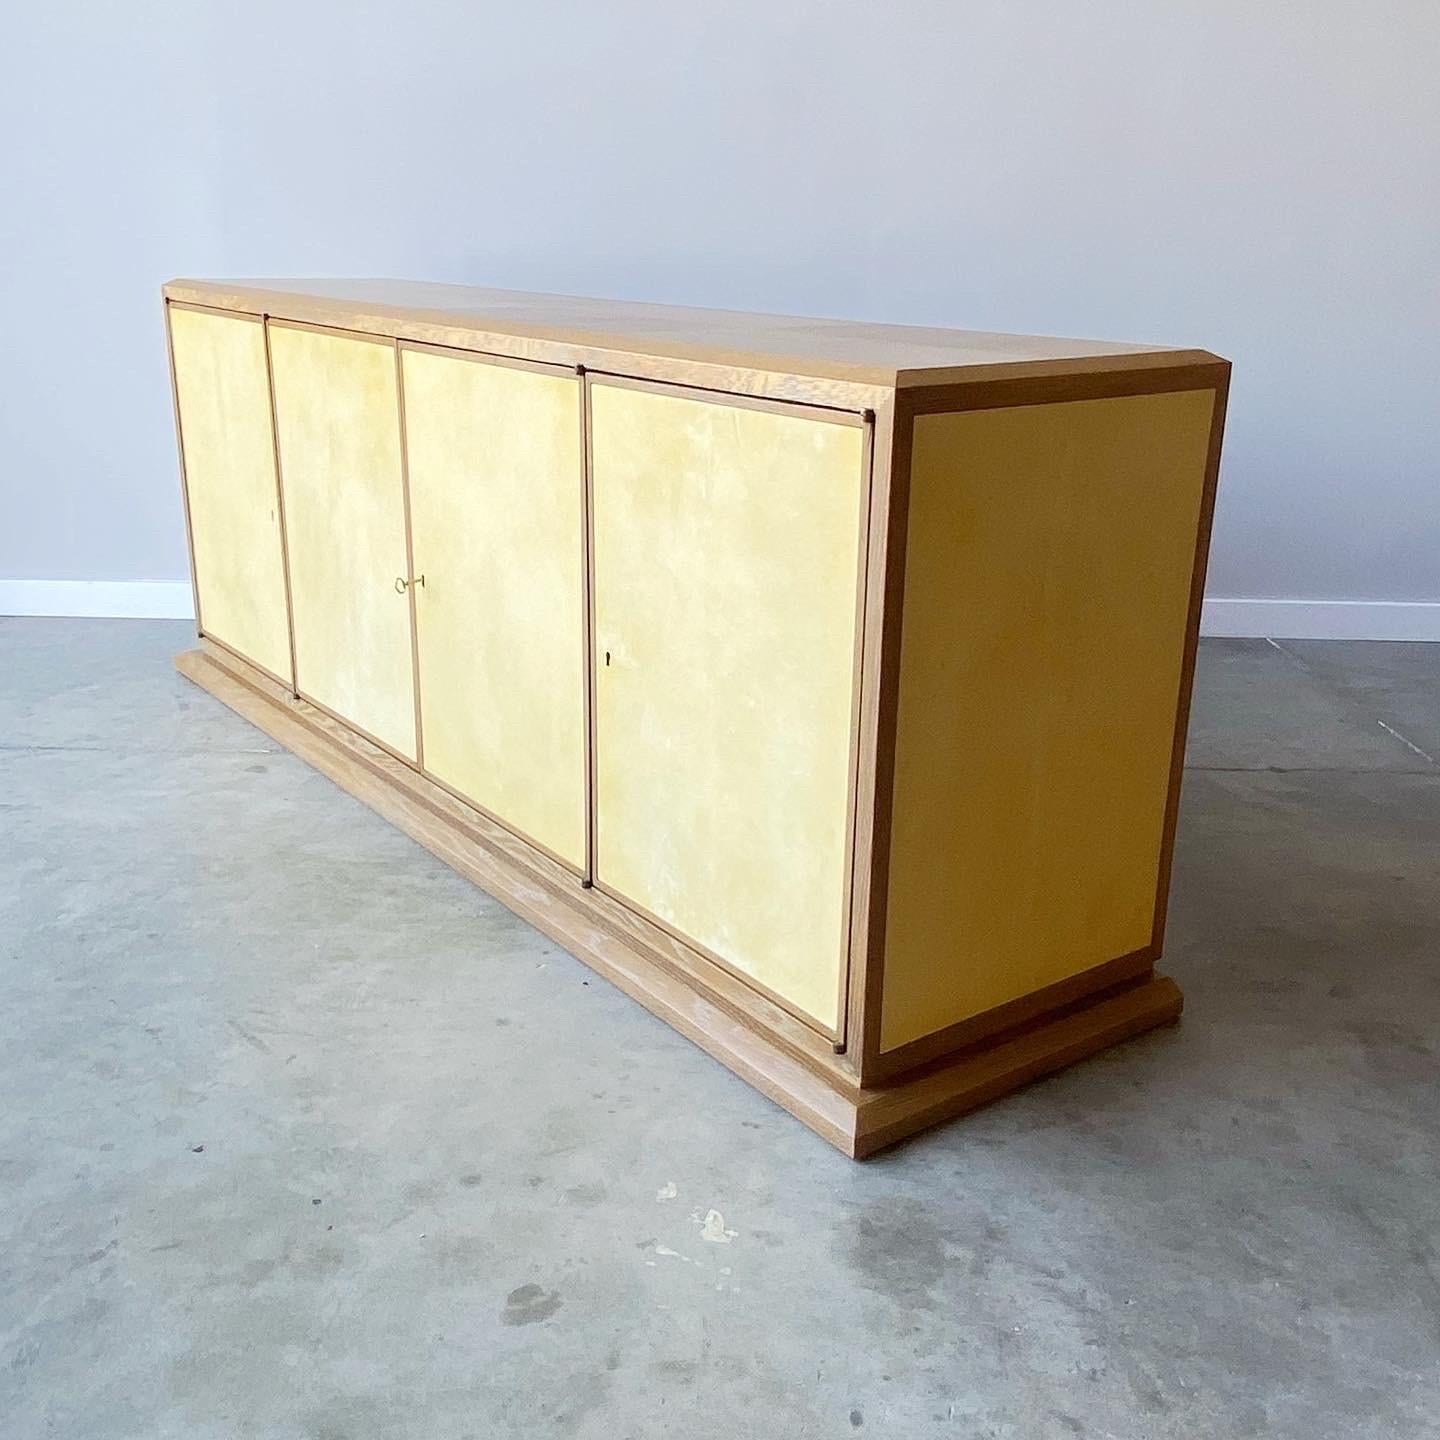 Goatskin Tommi Parzinger Style Cabinet/Credenza, Cerused Oak and Parchment